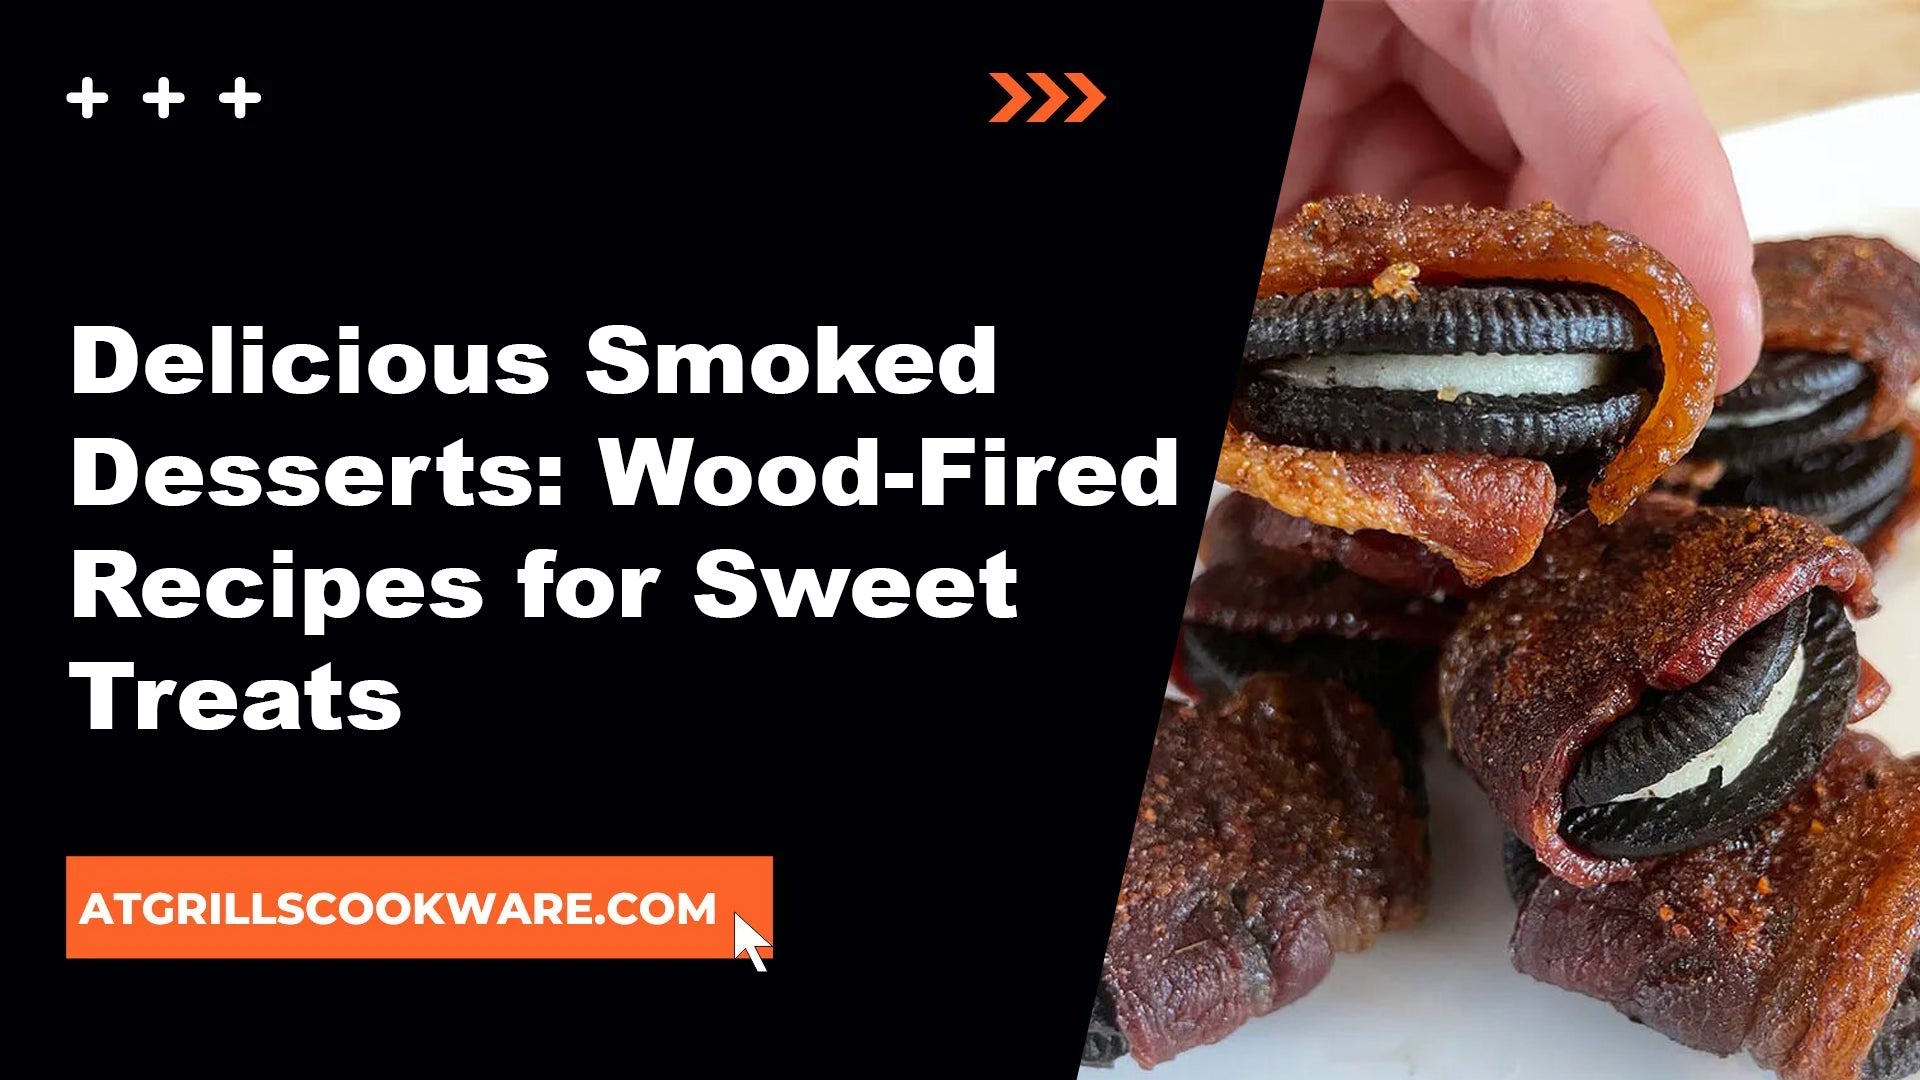 Delicious Smoked Desserts: Wood-Fired Recipes for Sweet Treats